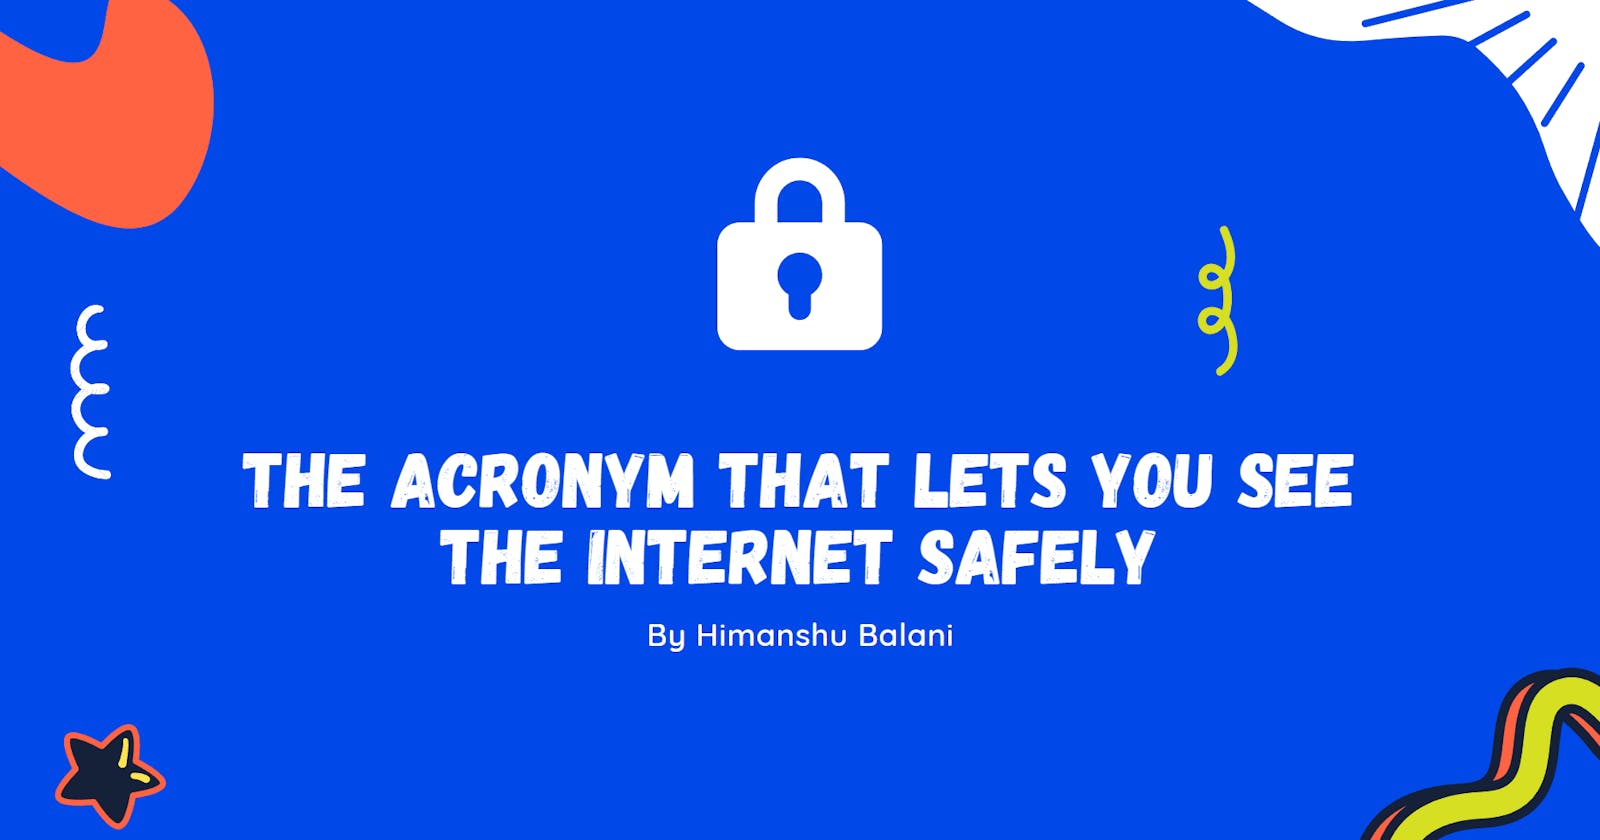 The Acronym that lets you see the Internet safely